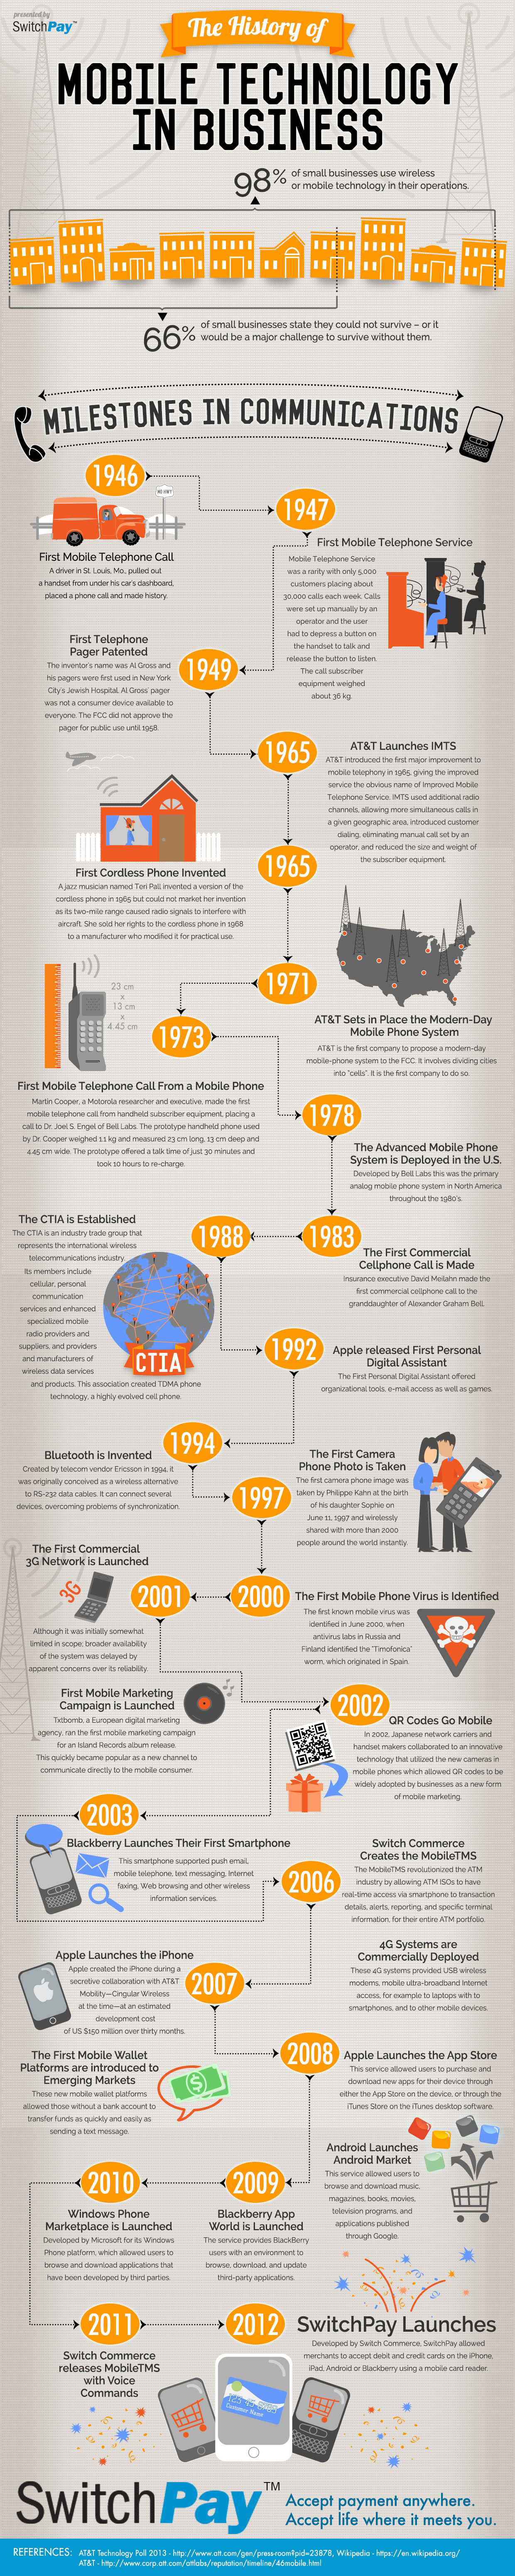  The History of Mobile Technology in Business